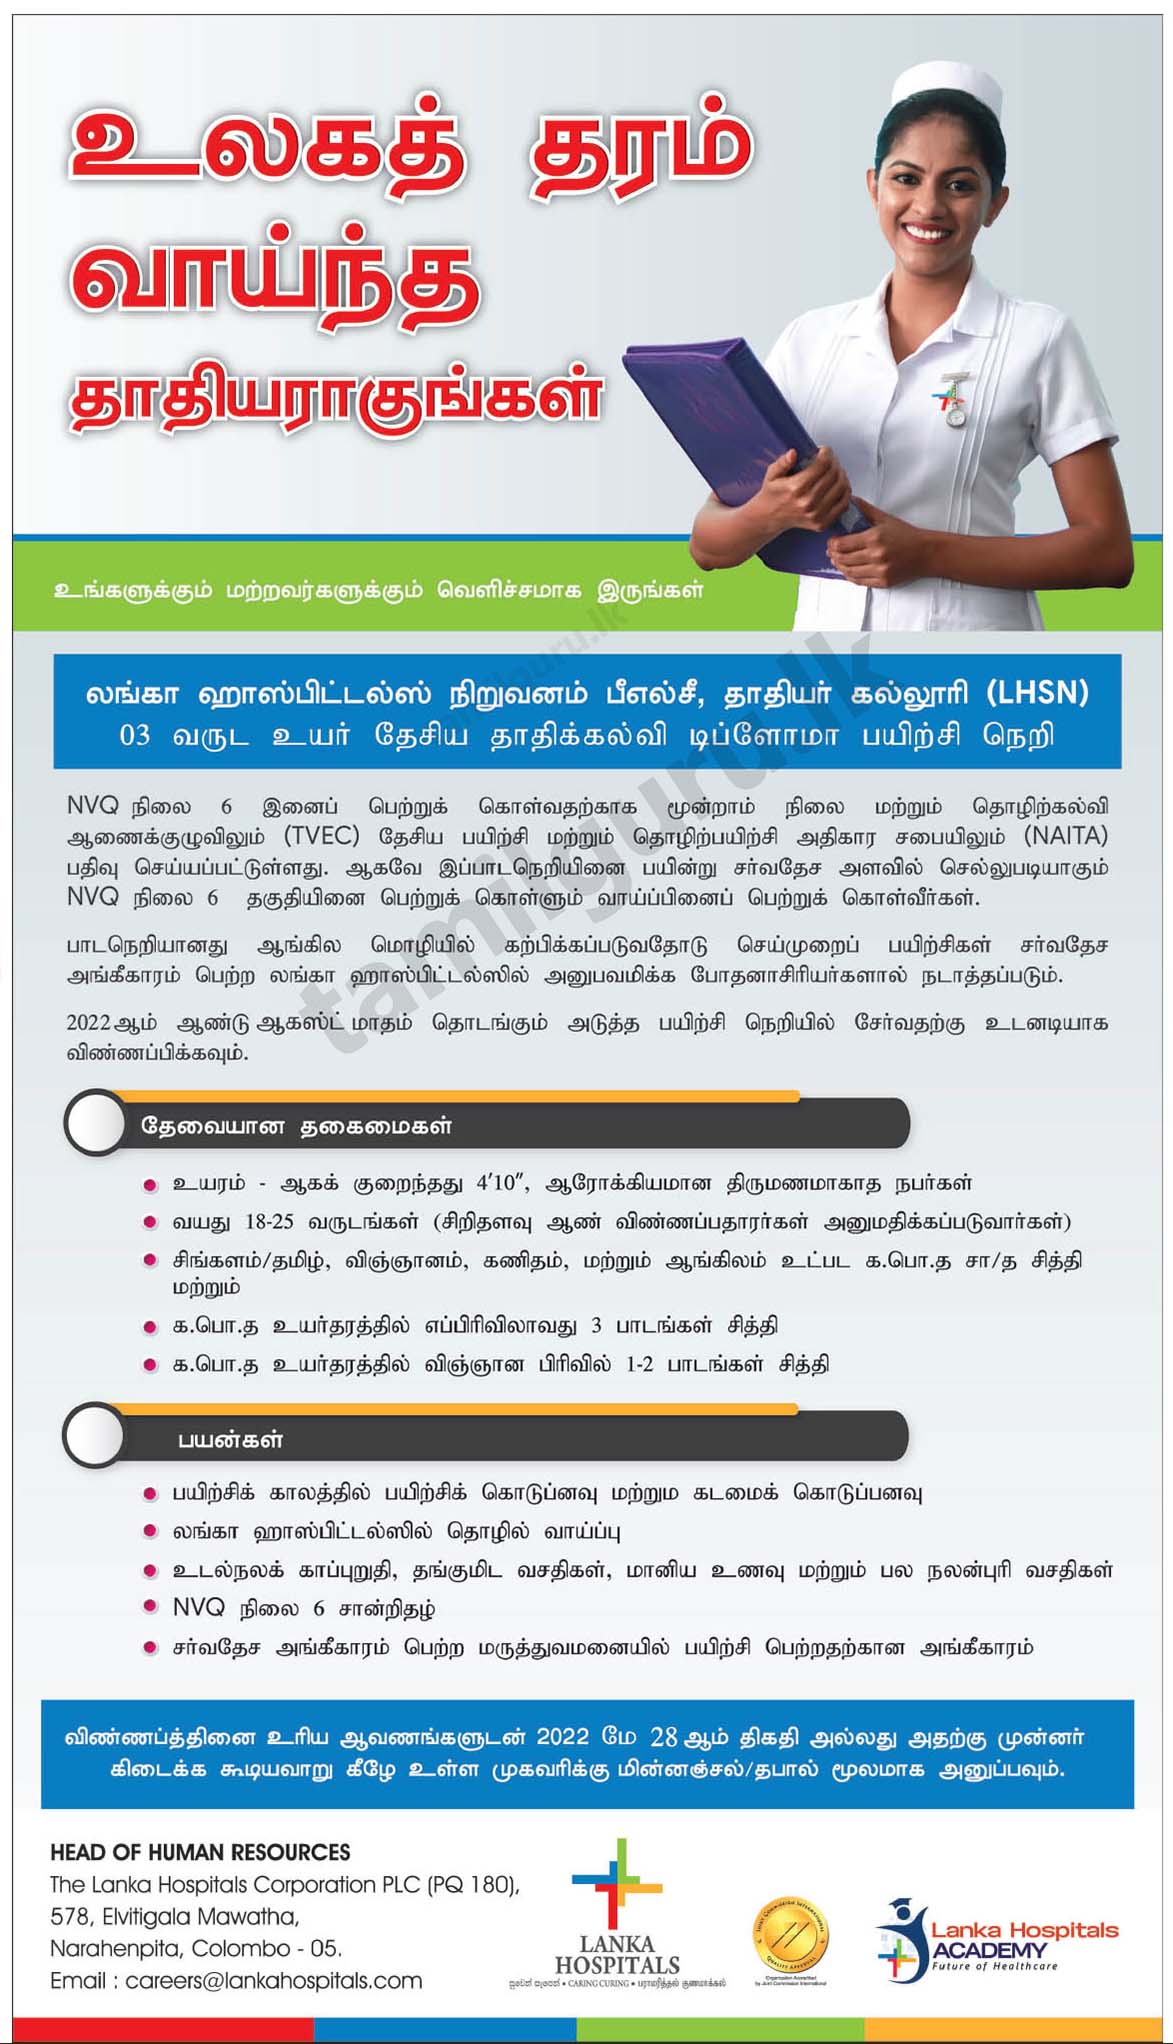 Higher National Diploma (HND) in Nursing Training Course (NVQ 6) Intake 2022 - Lanka Hospitals Academy (Details in Tamil)